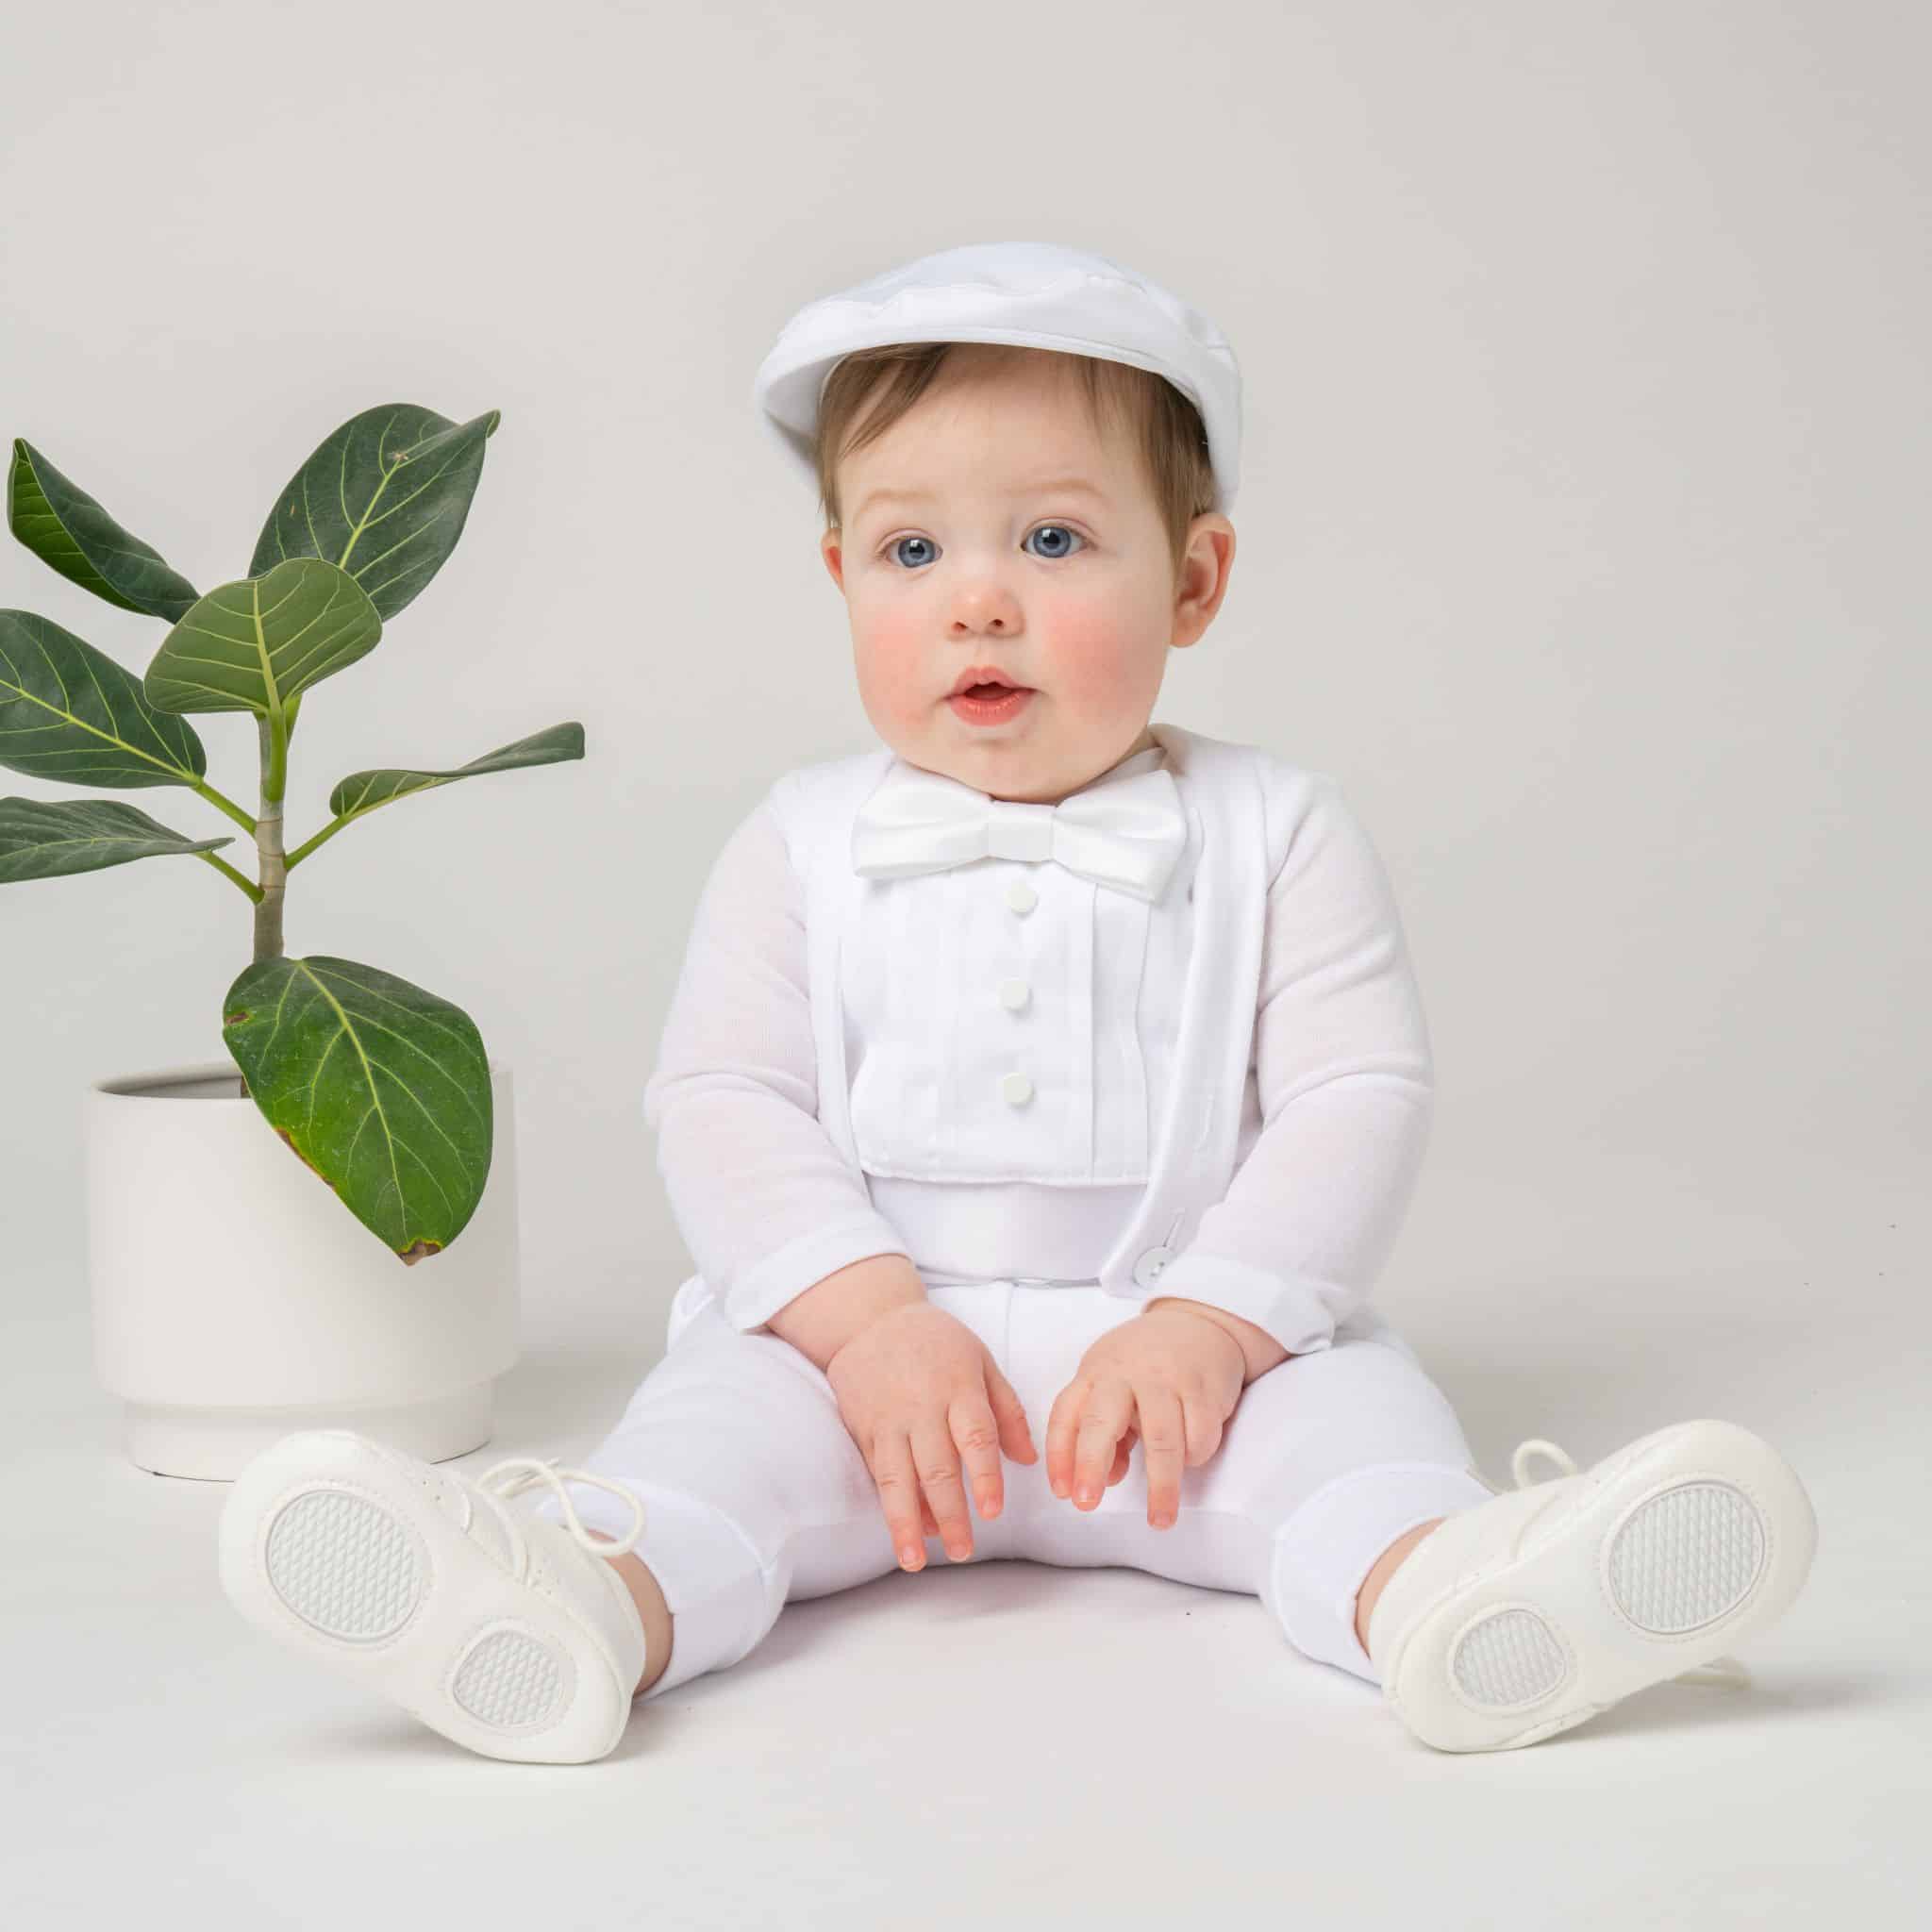 How to Dress Your Baby for a Newborn Photo Shoot - Purebaby - Purebaby